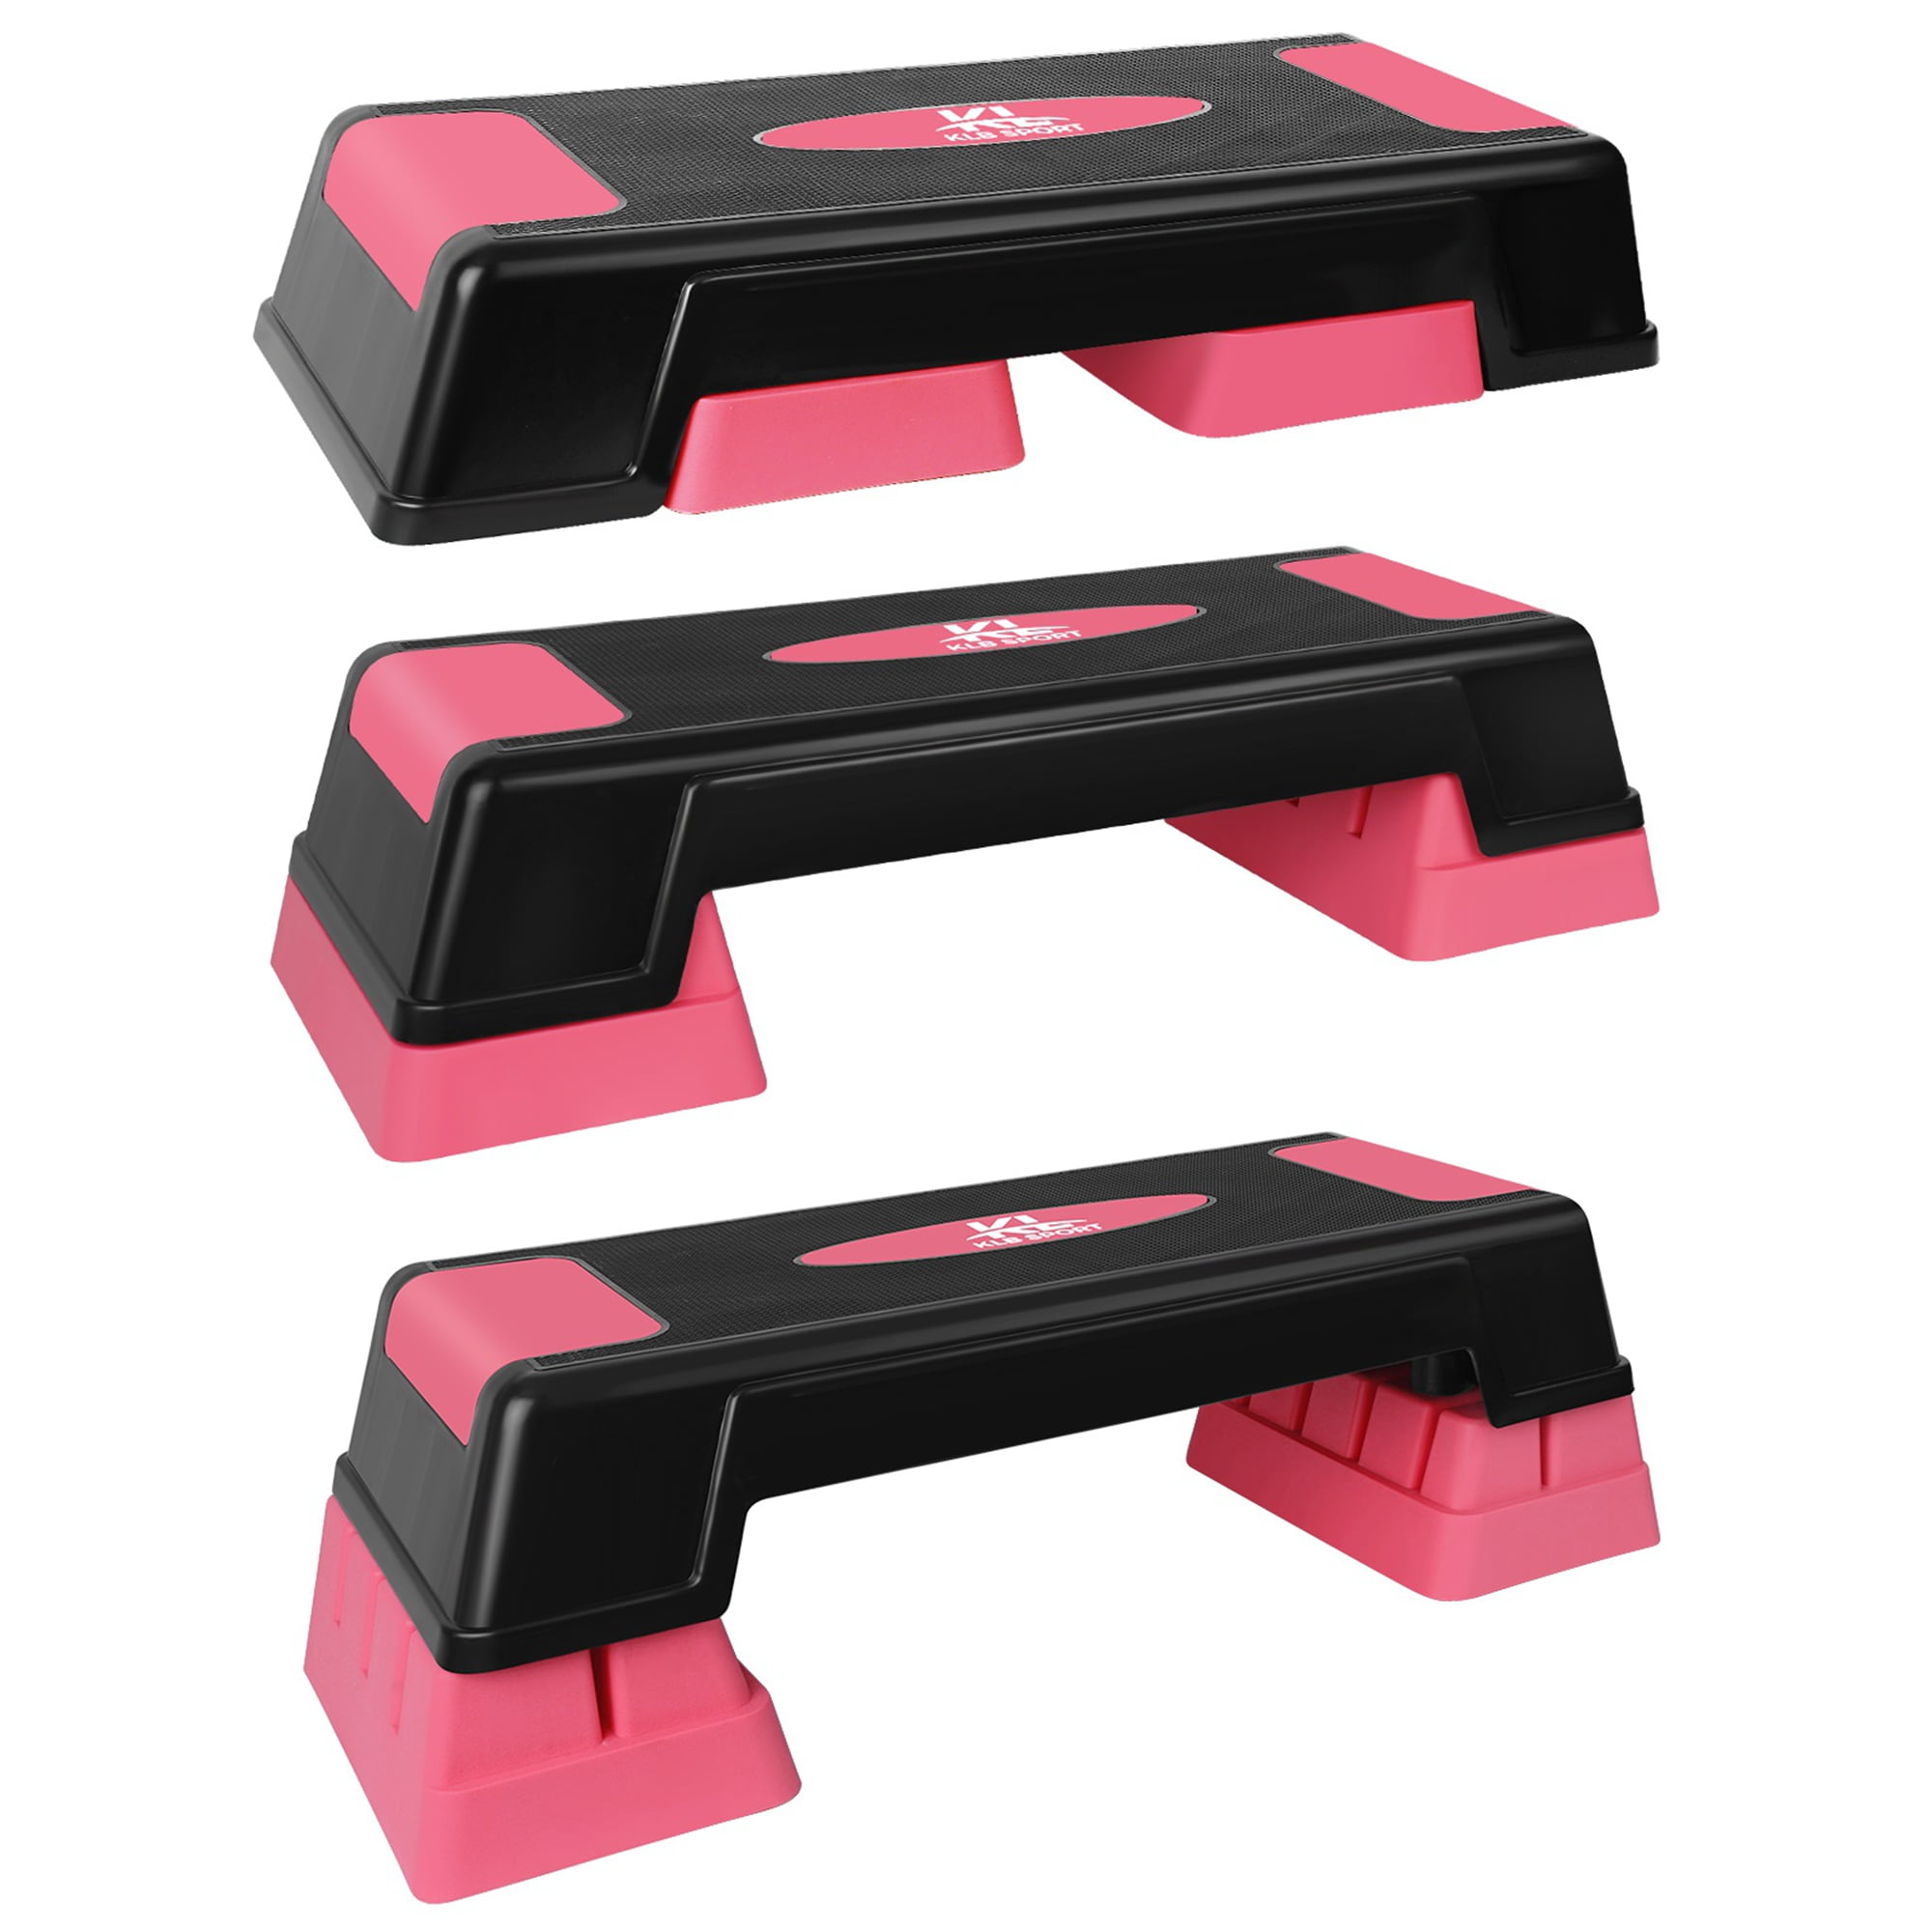 XN8 Adjustable Workout Aerobic Stepper Exercise Step Platform with 3 Risers  Non Slip Fitness Stepper for Home Gym Cardio Strength Training Pink